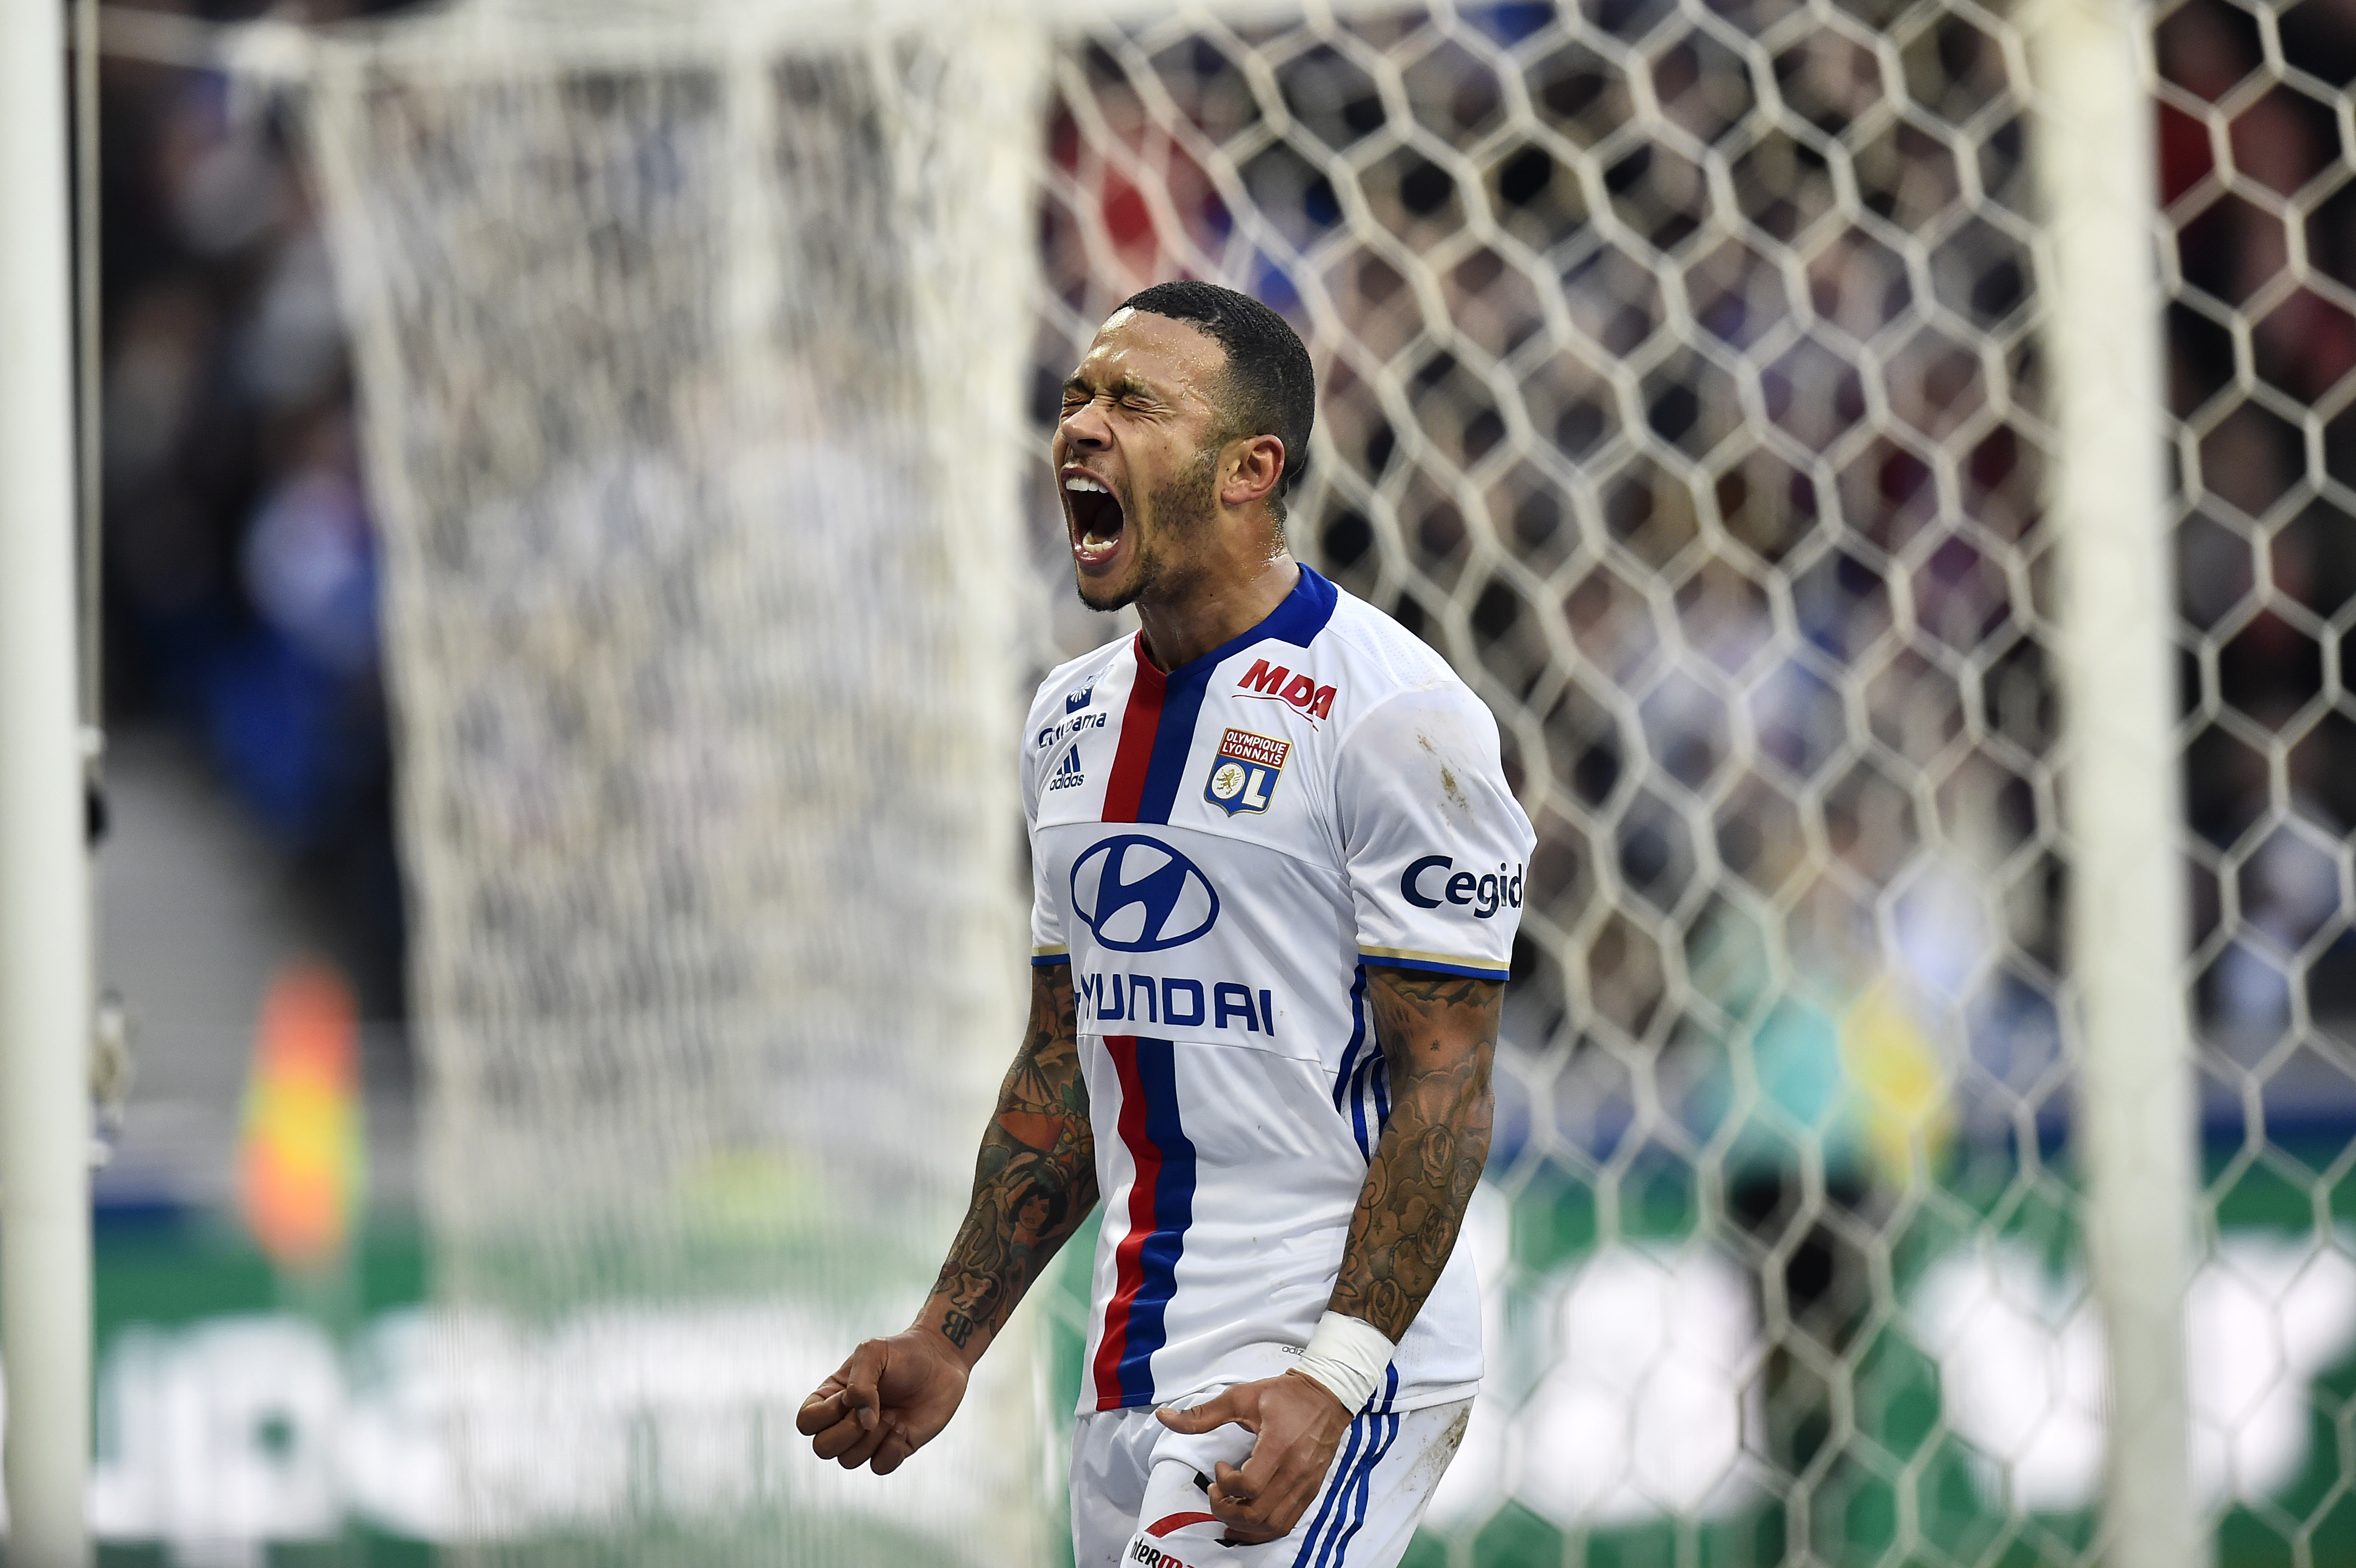 Lyon's Dutch forward Memphis Depay reacts during the French L1 football match between Olympique Lyonnais (OL) and Dijon (DFCO) on February 19, 2017, at the Parc Olympique Lyonnais stadium in Decines-Charpieu near Lyon, central-eastern France.  / AFP / ROMAIN LAFABREGUE        (Photo credit should read ROMAIN LAFABREGUE/AFP/Getty Images)